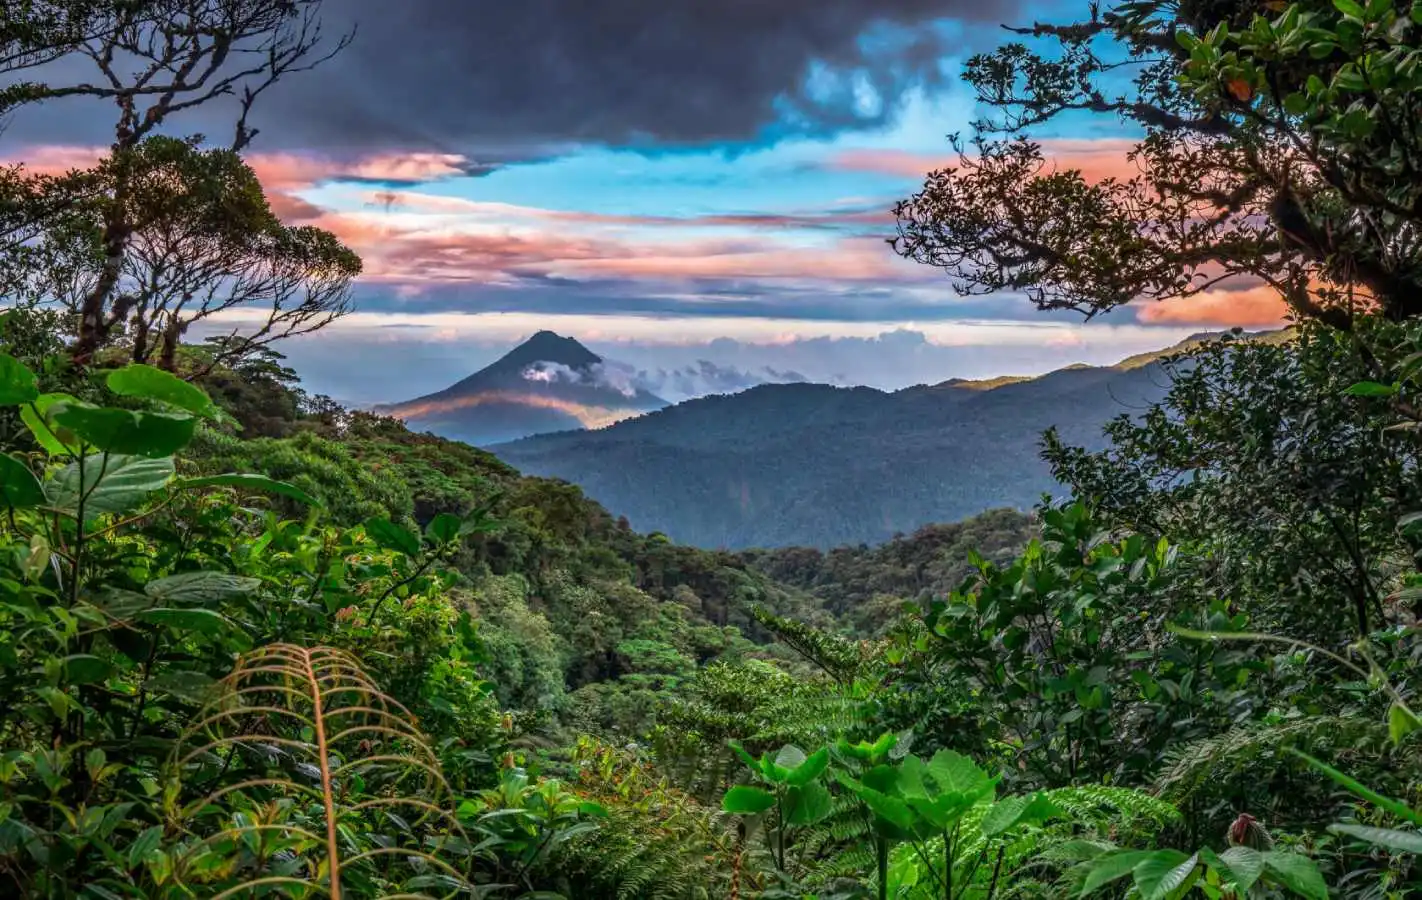 Costa Rica iage of volcano and rainforests